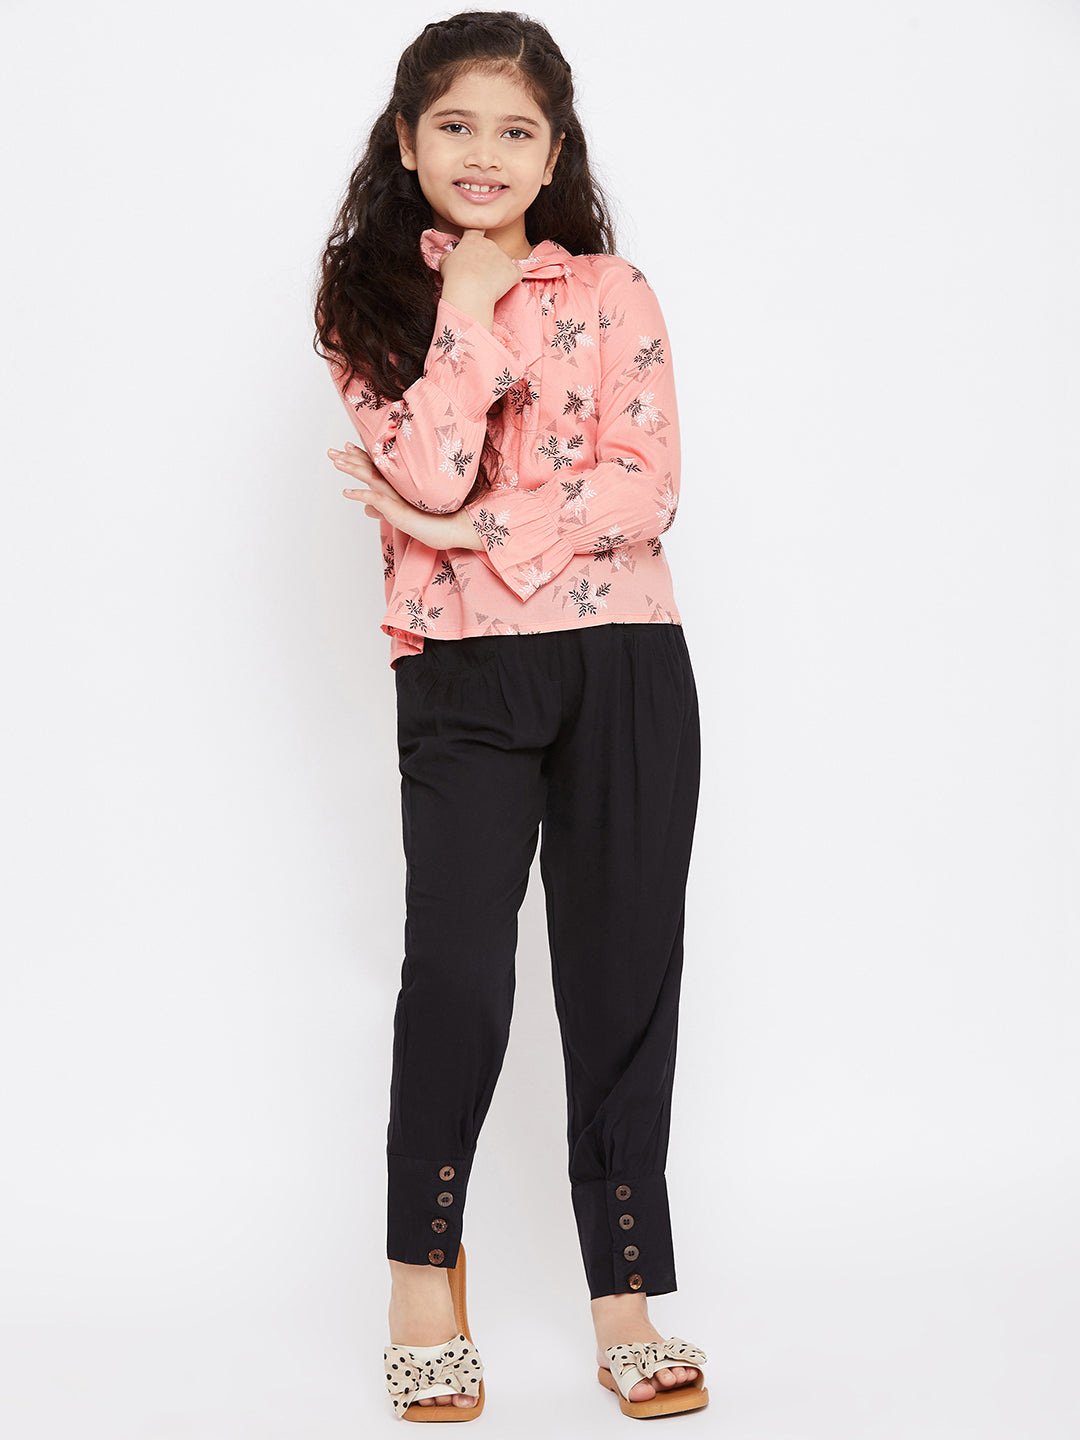 Girl's Printed Top with trousers Pant Pink - StyloBug KIDS